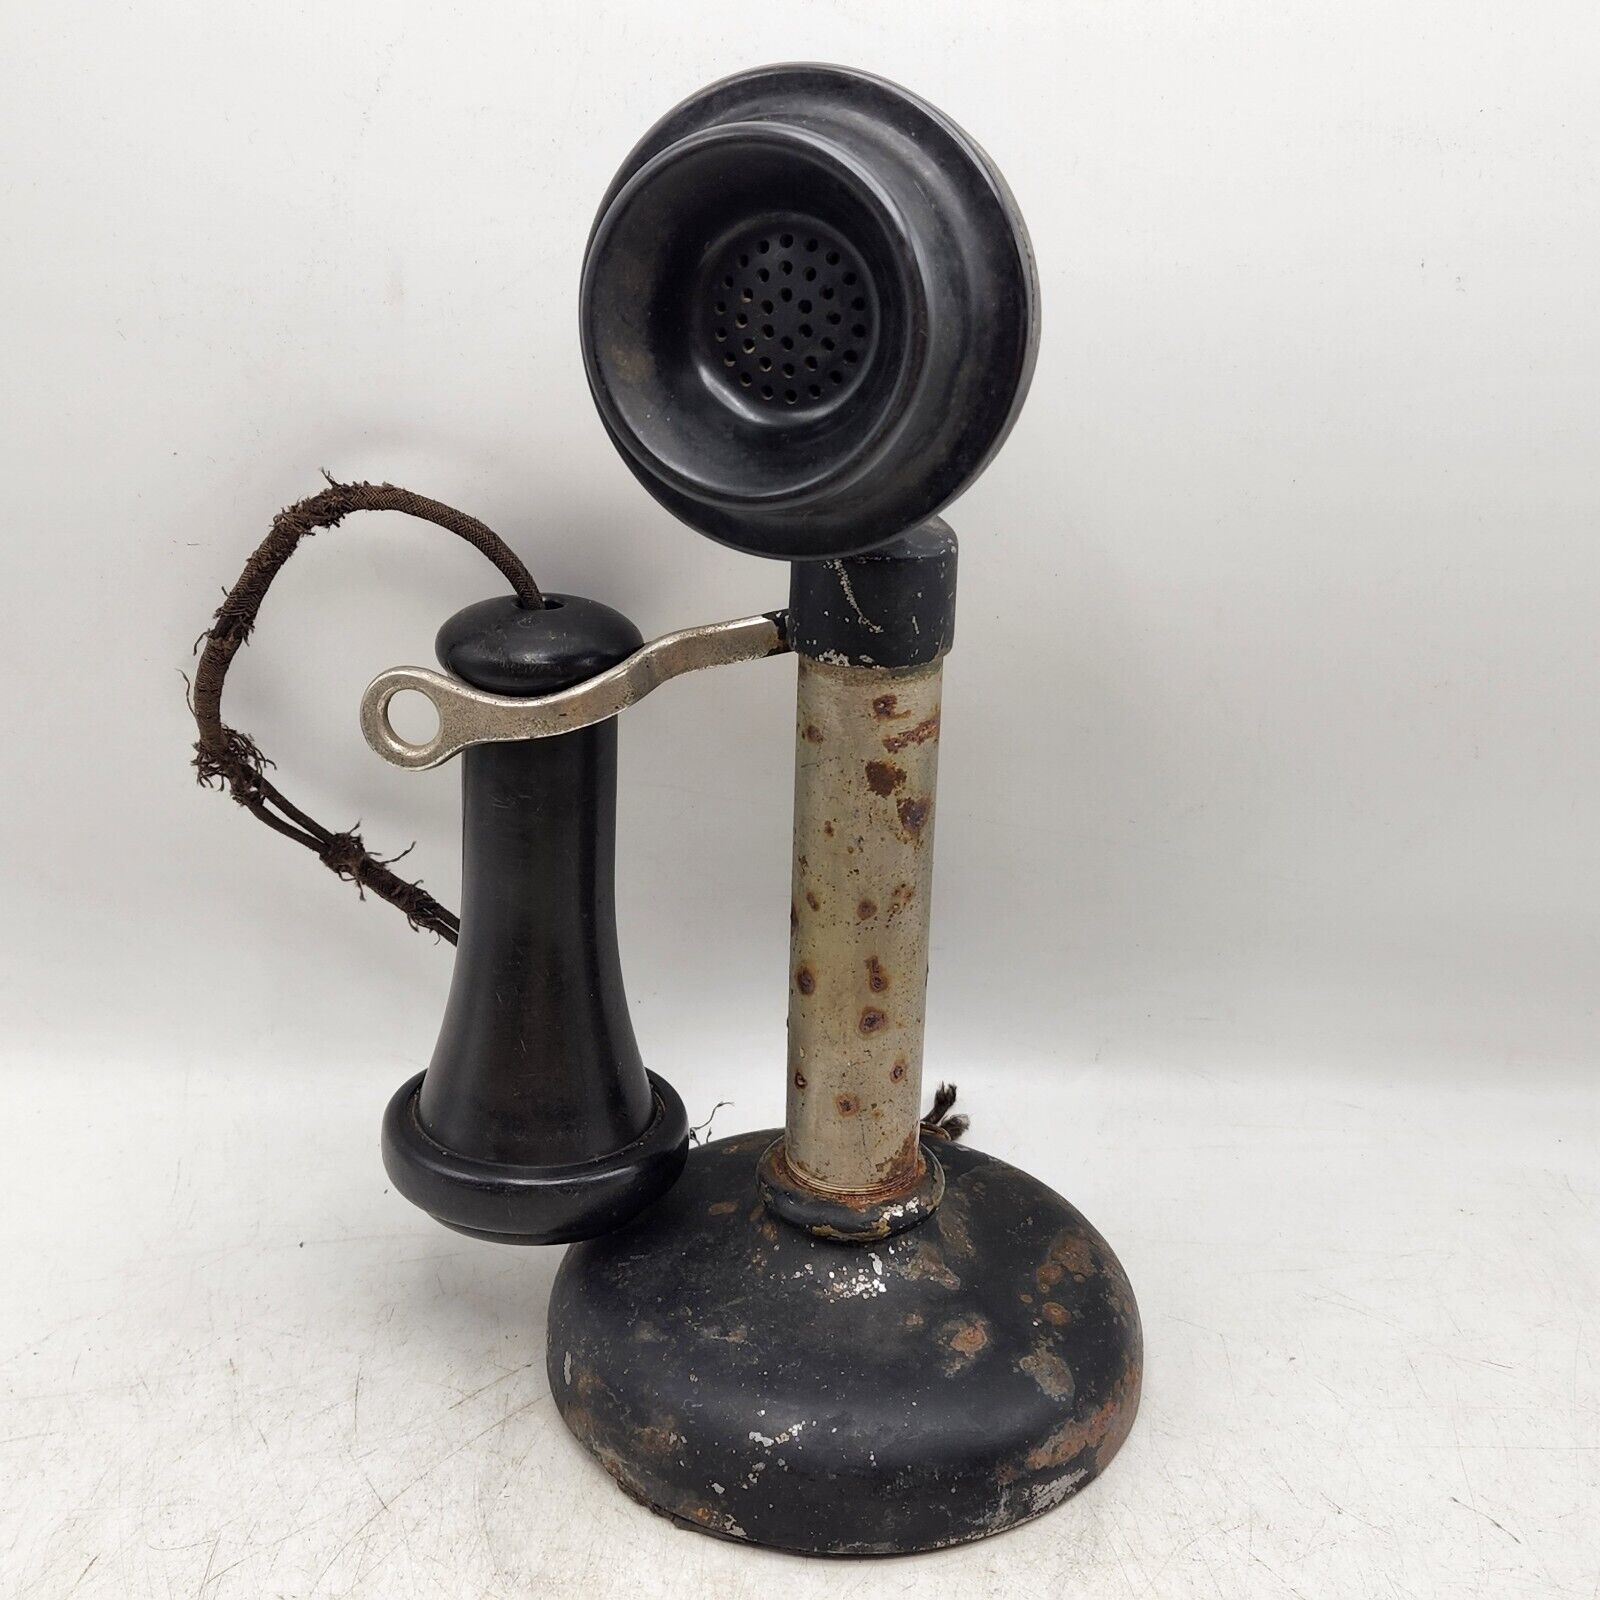 Vintage/Antique The Dean Electric Co. Elyria Ohio Candlestick Phone w/ Receiver